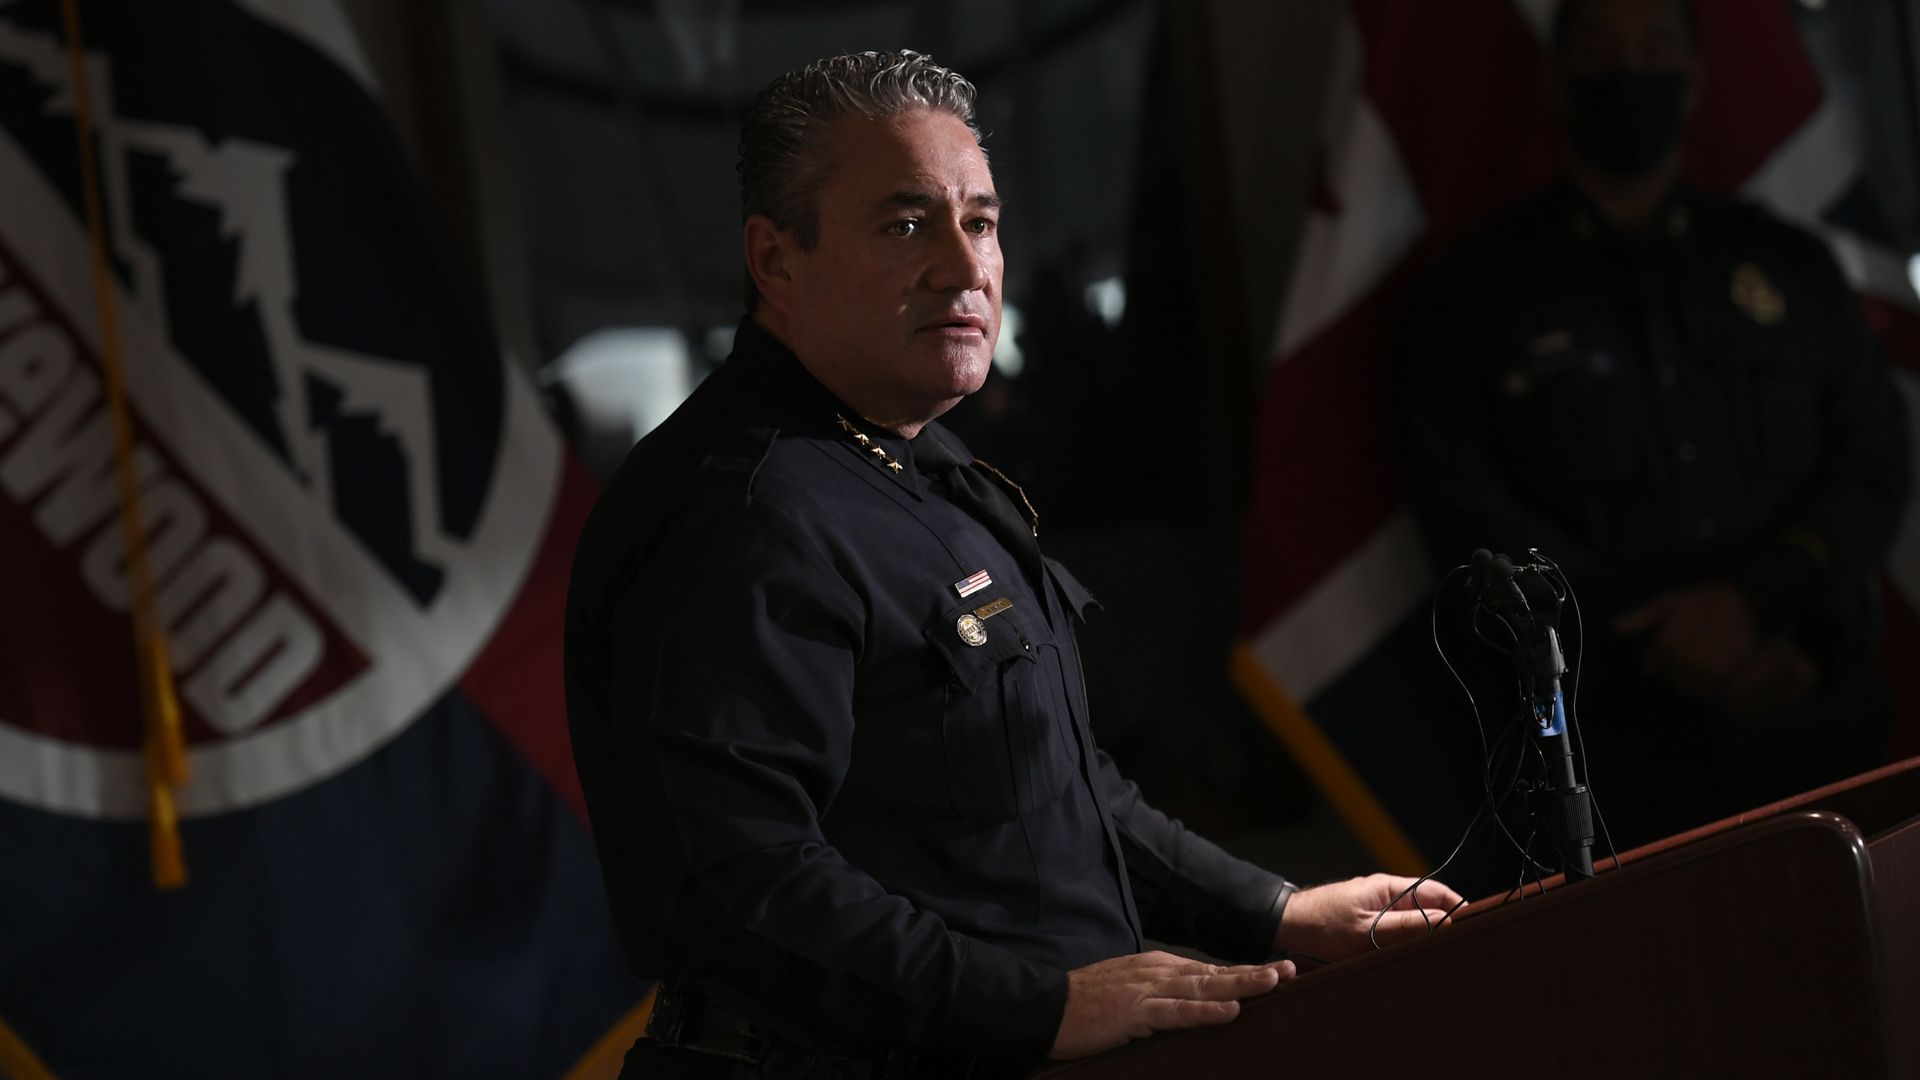 A police chief in full uniform stands near a lectern in a dimly-lit room while addressing member of the press.  